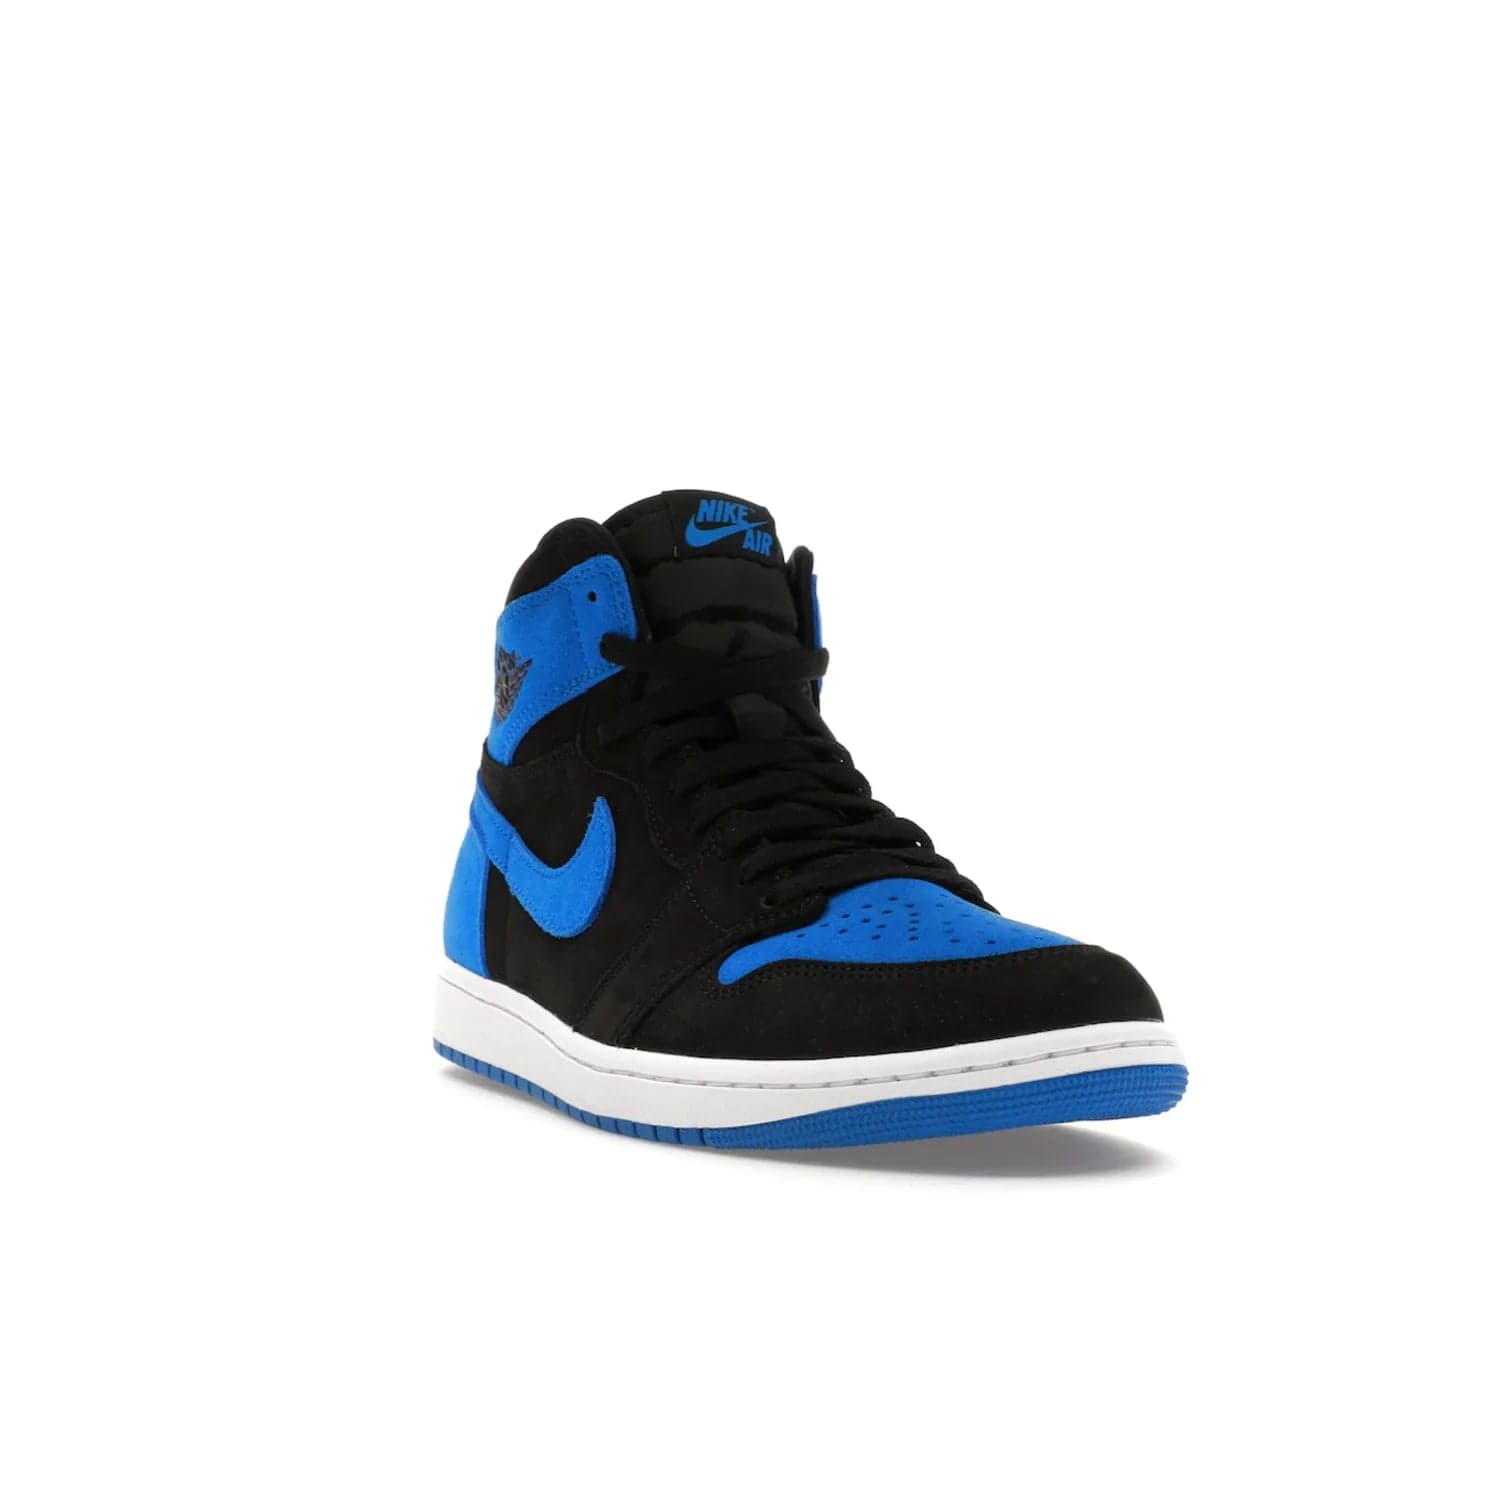 Jordan 1 Retro High OG Royal Reimagined - Image 7 - Only at www.BallersClubKickz.com - ####
Old meets the new: Jordan 1 Retro High OG 'Royal Reimagined' is a bold statement of evolution with its royal blue and black suede material makeup. Swoosh overlays, Wings logos, padded ankle collars and Nike Air tags maintain the OG's legendary lineage. Get a pair on November 4th and be part of a fearless, unyielding story.